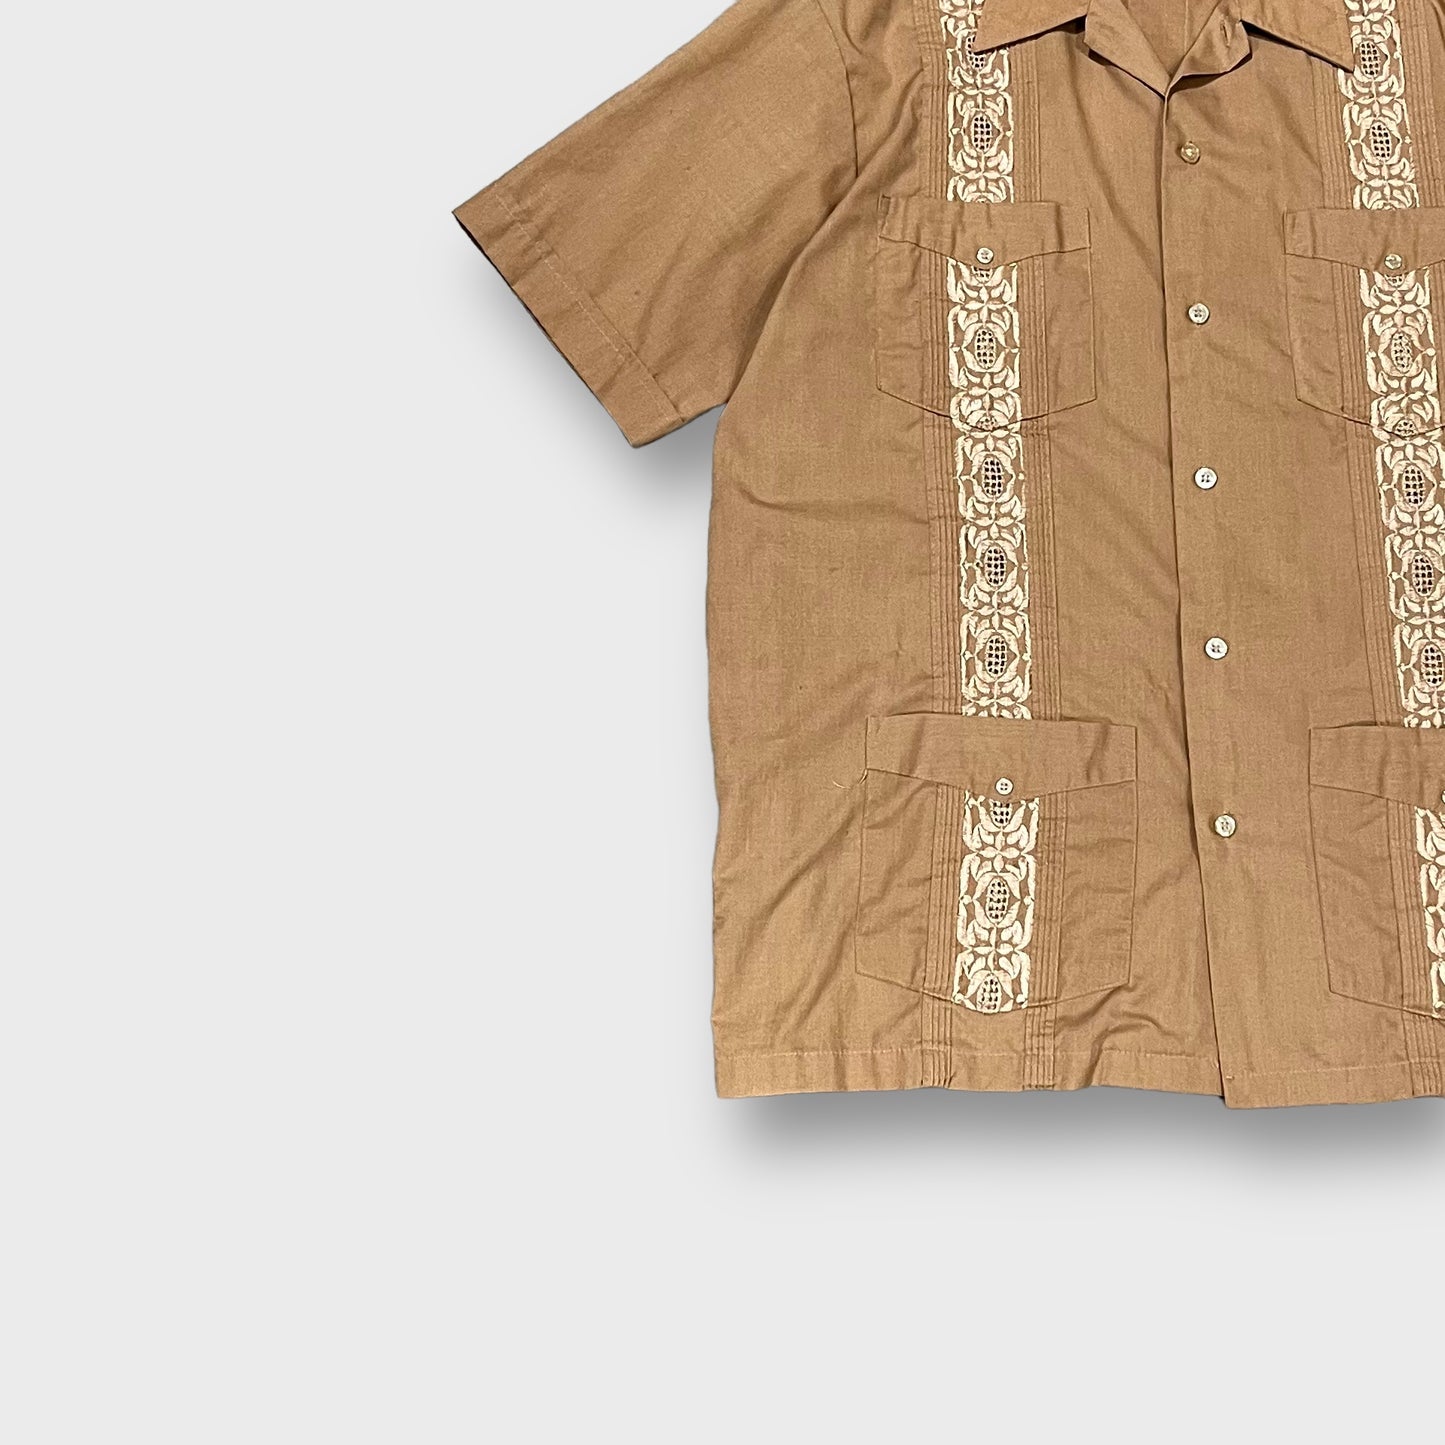 80’s “HABAND OF PATERSON”
s/s cuba shirt